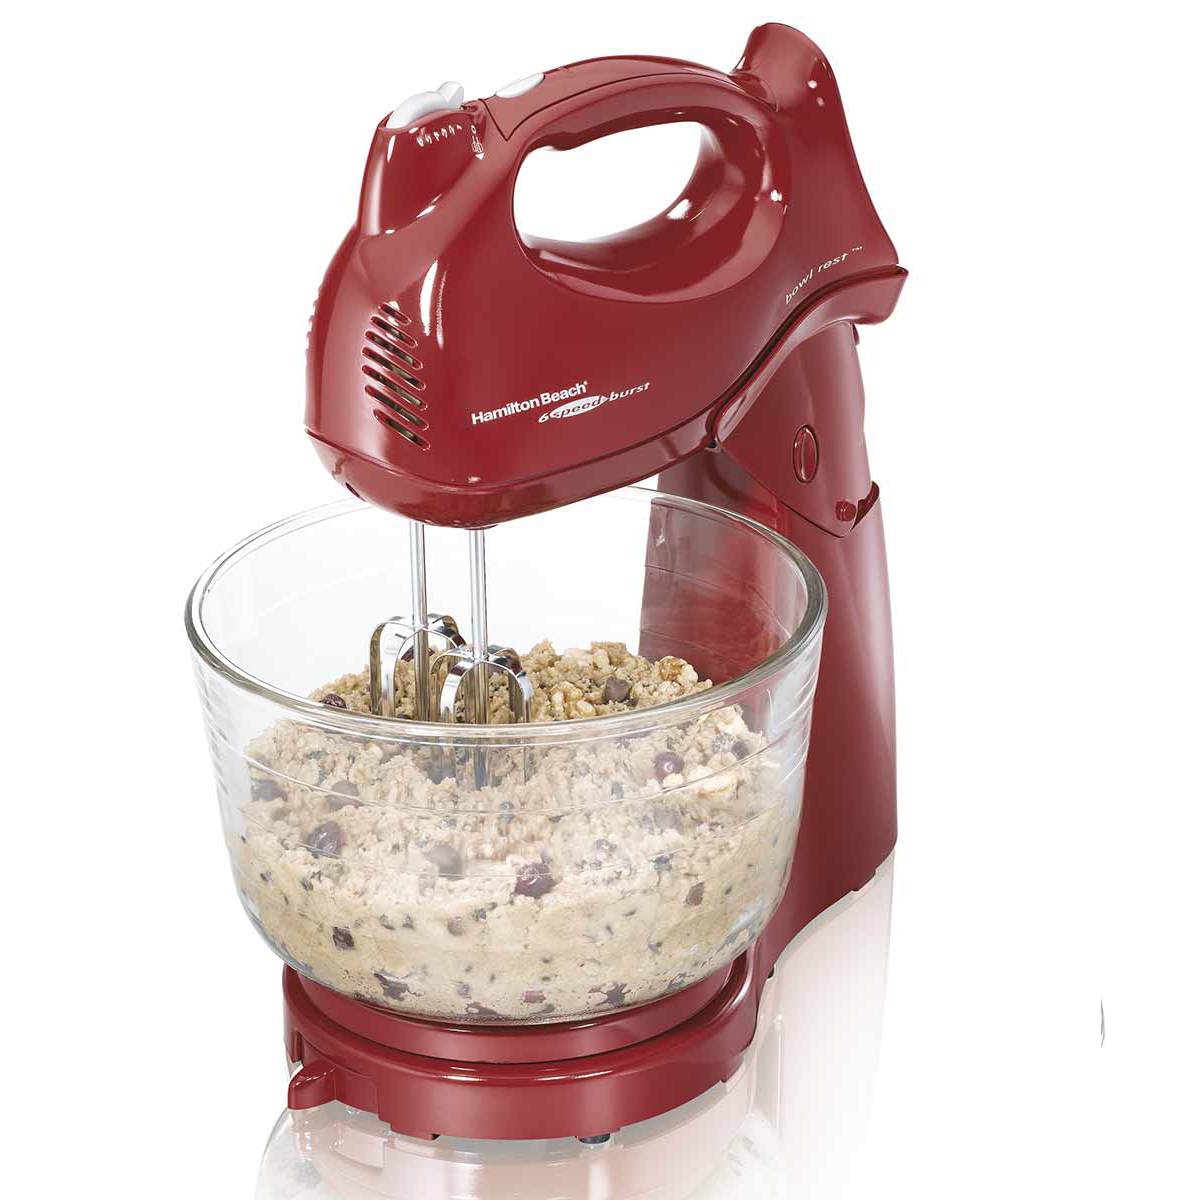 Power Deluxe™ 6 Speed Hand/Stand Mixer, Red - 64699